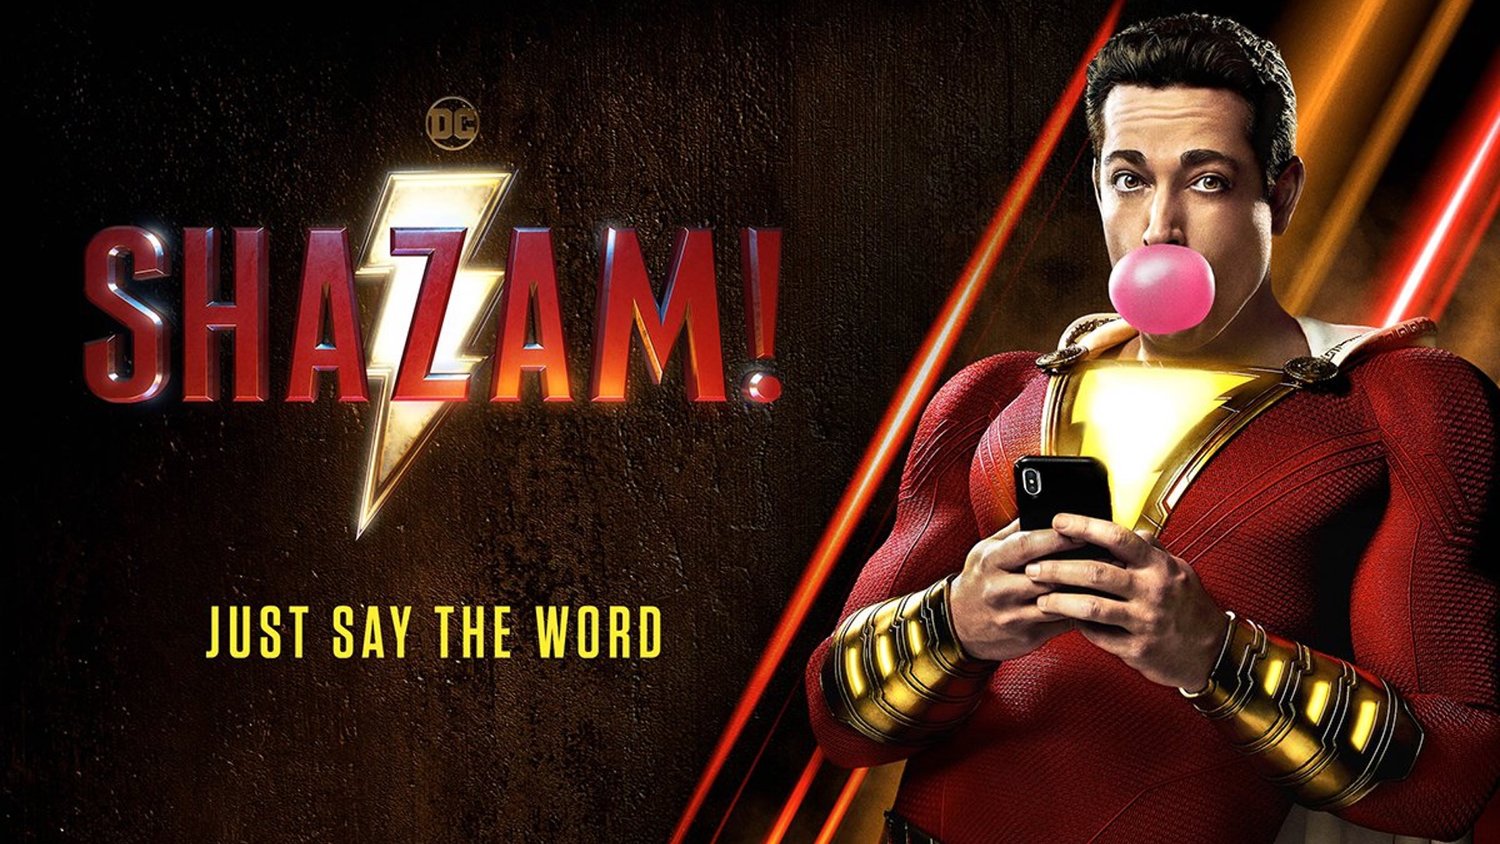 TODAY I WATCHED... (Movies, TV) 2019 - Page 16 New-poster-for-shazam-asks-us-to-just-say-the-word-social